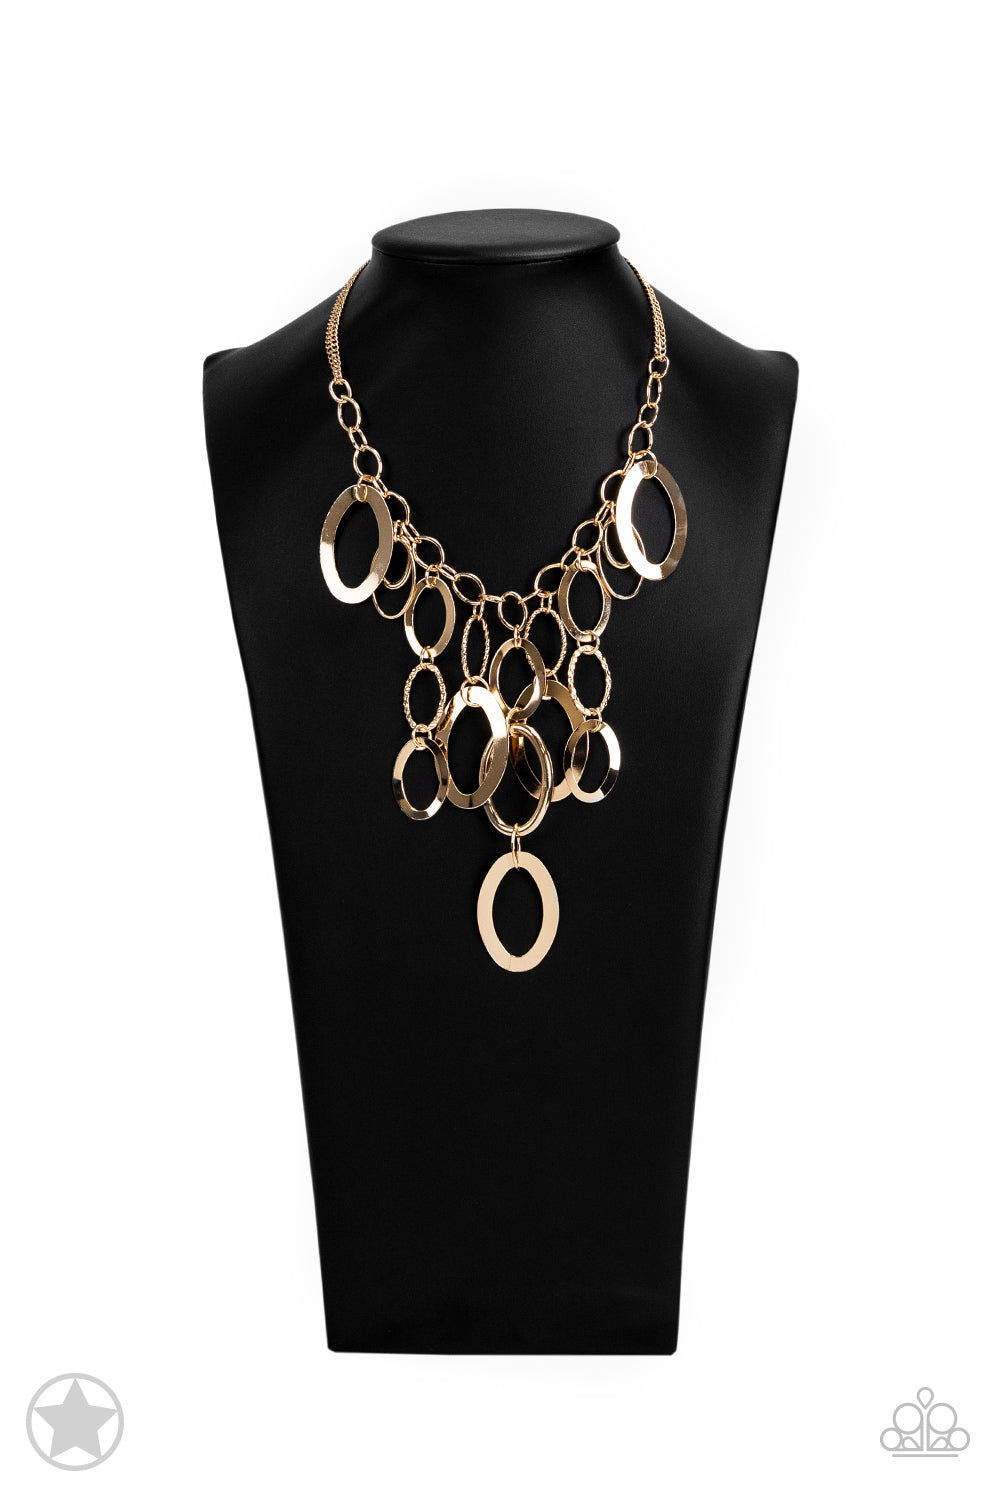 A Golden Spell - Gold Fashion Necklace - Paparazzi Accessories - Large gold links and shimmering textured gold rings cascade below a gold chain freely, allowing for movement that makes a bold statement.